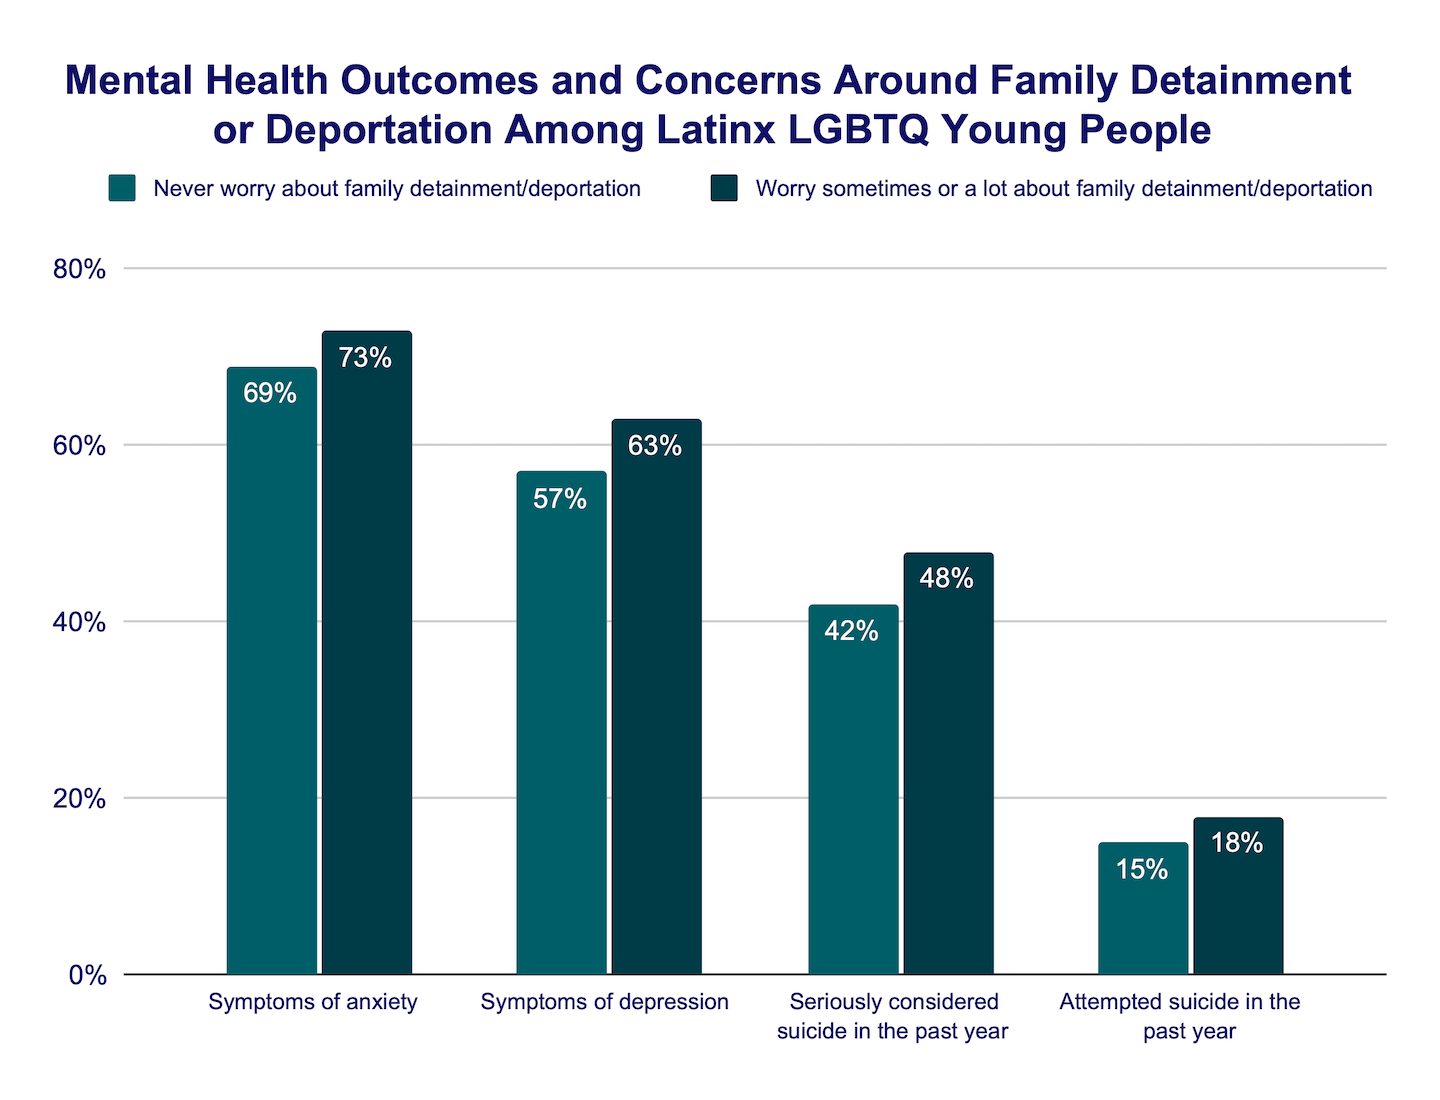 Mental health outcomes and concerns around family detainment or deportation among Latinx LGBTQ young people bar graph